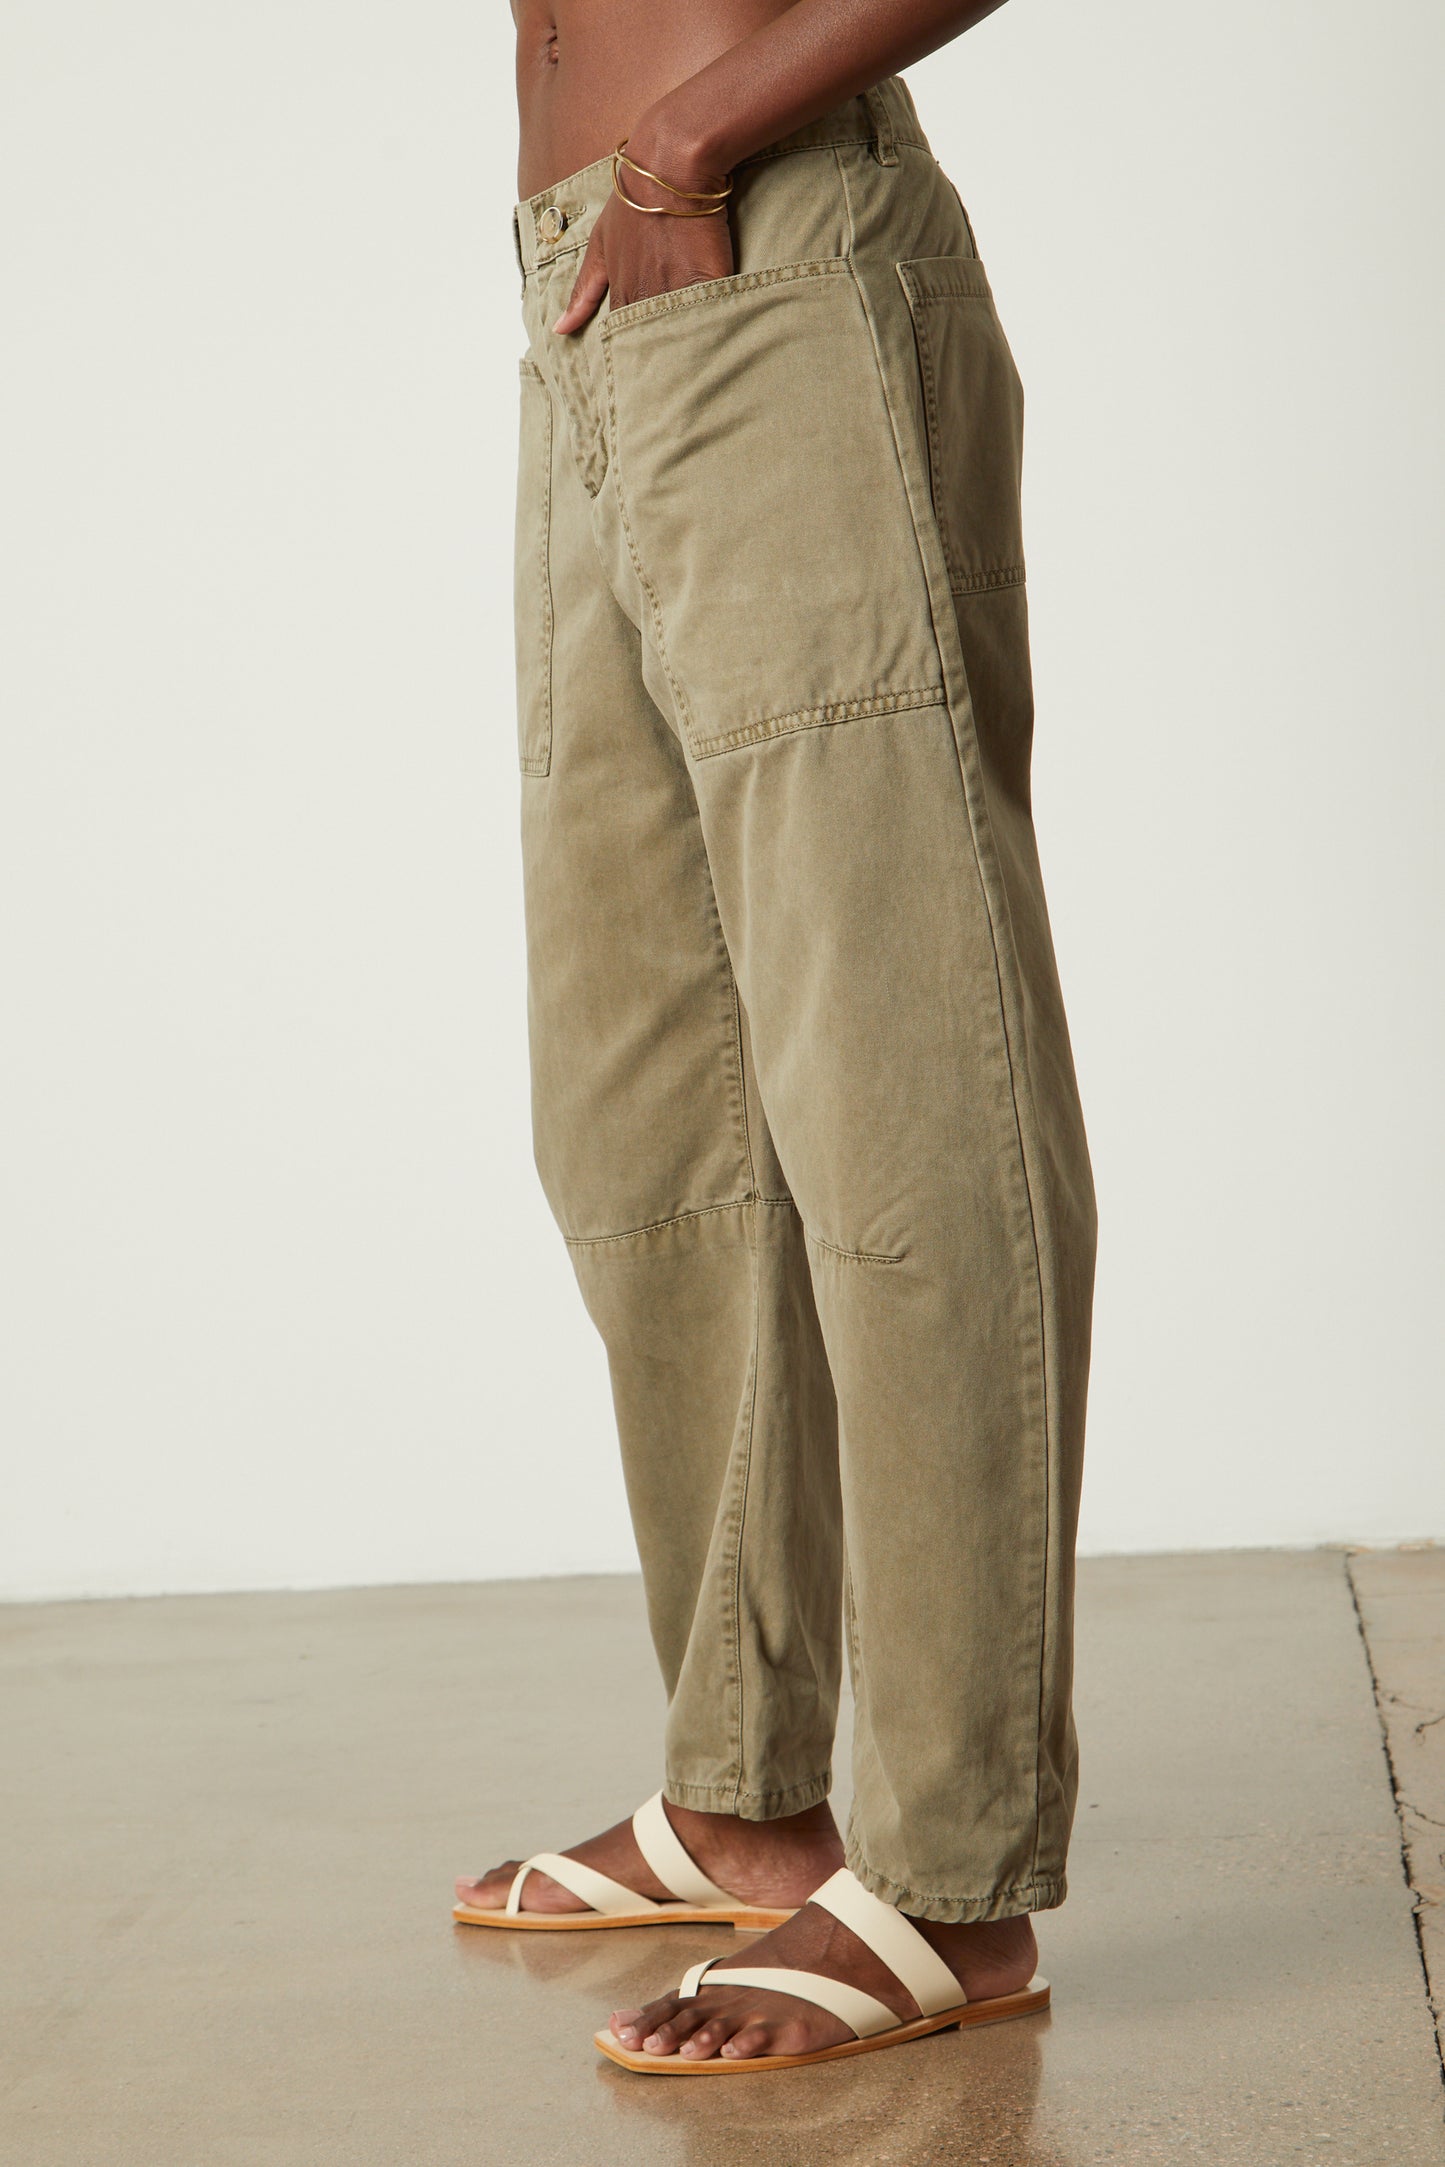 BRYLIE SANDED TWILL PANT IN GRAVEL